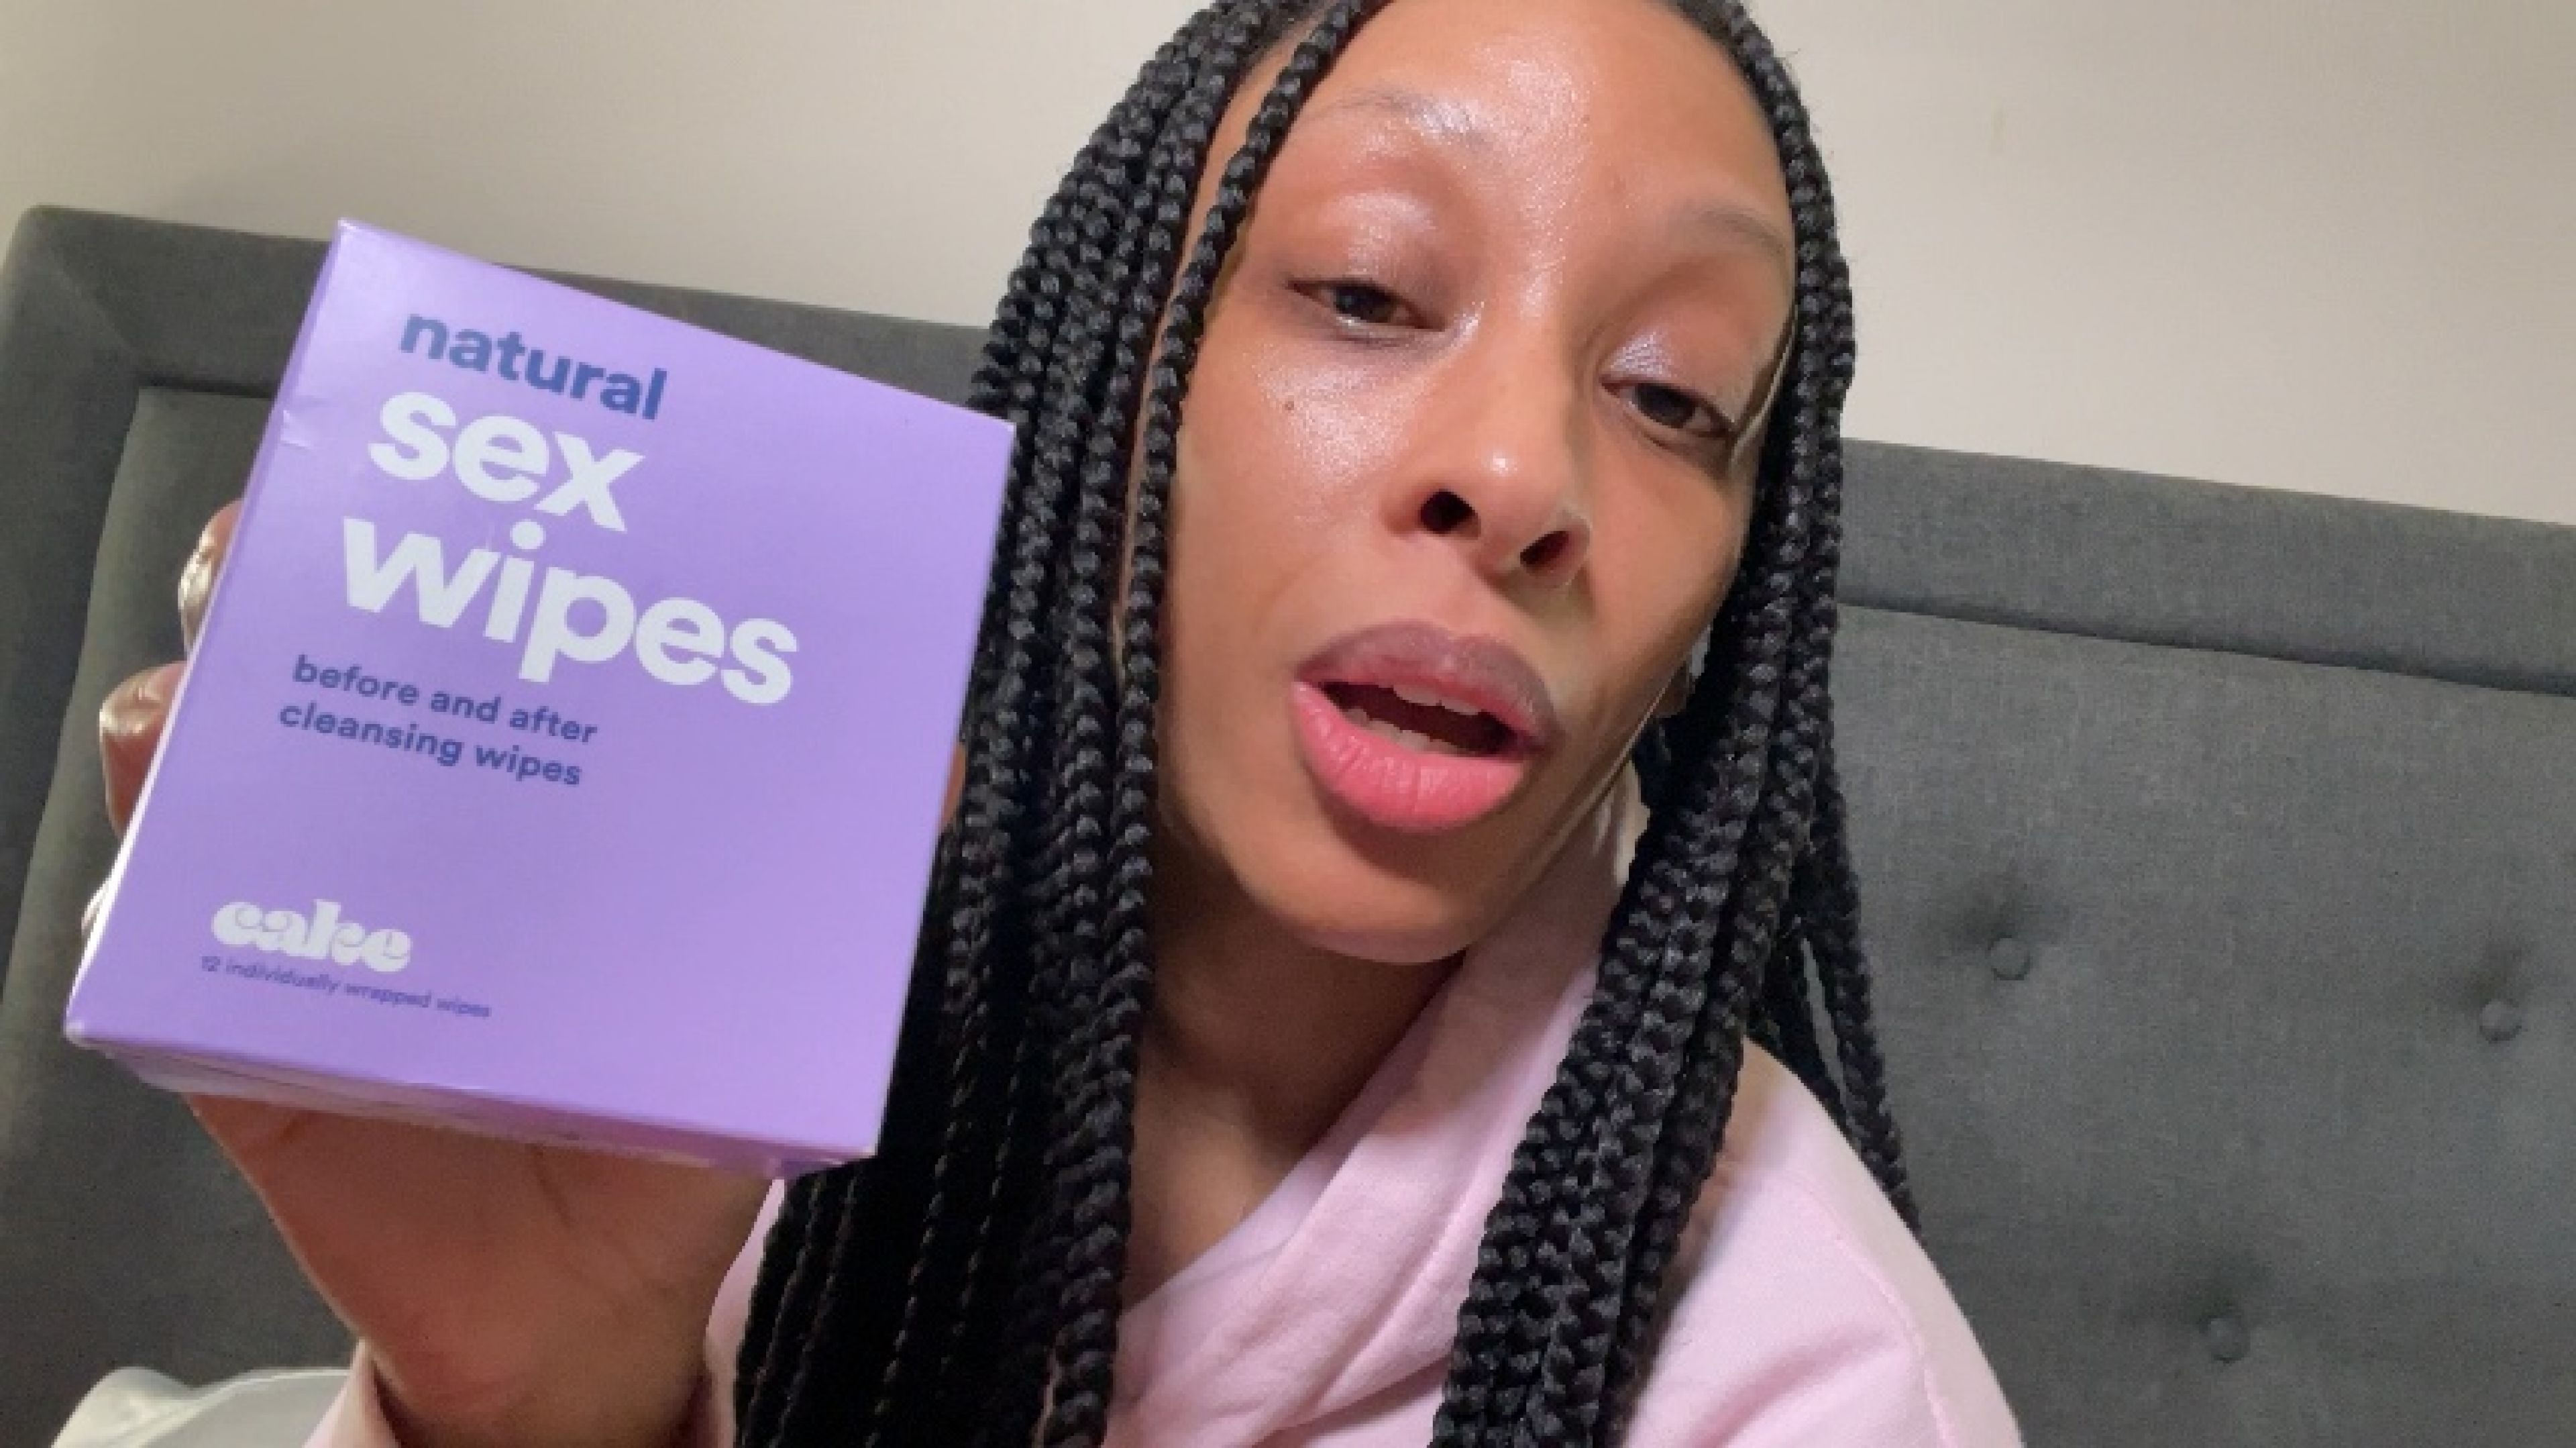 Product Review: Natural Sex Wipes